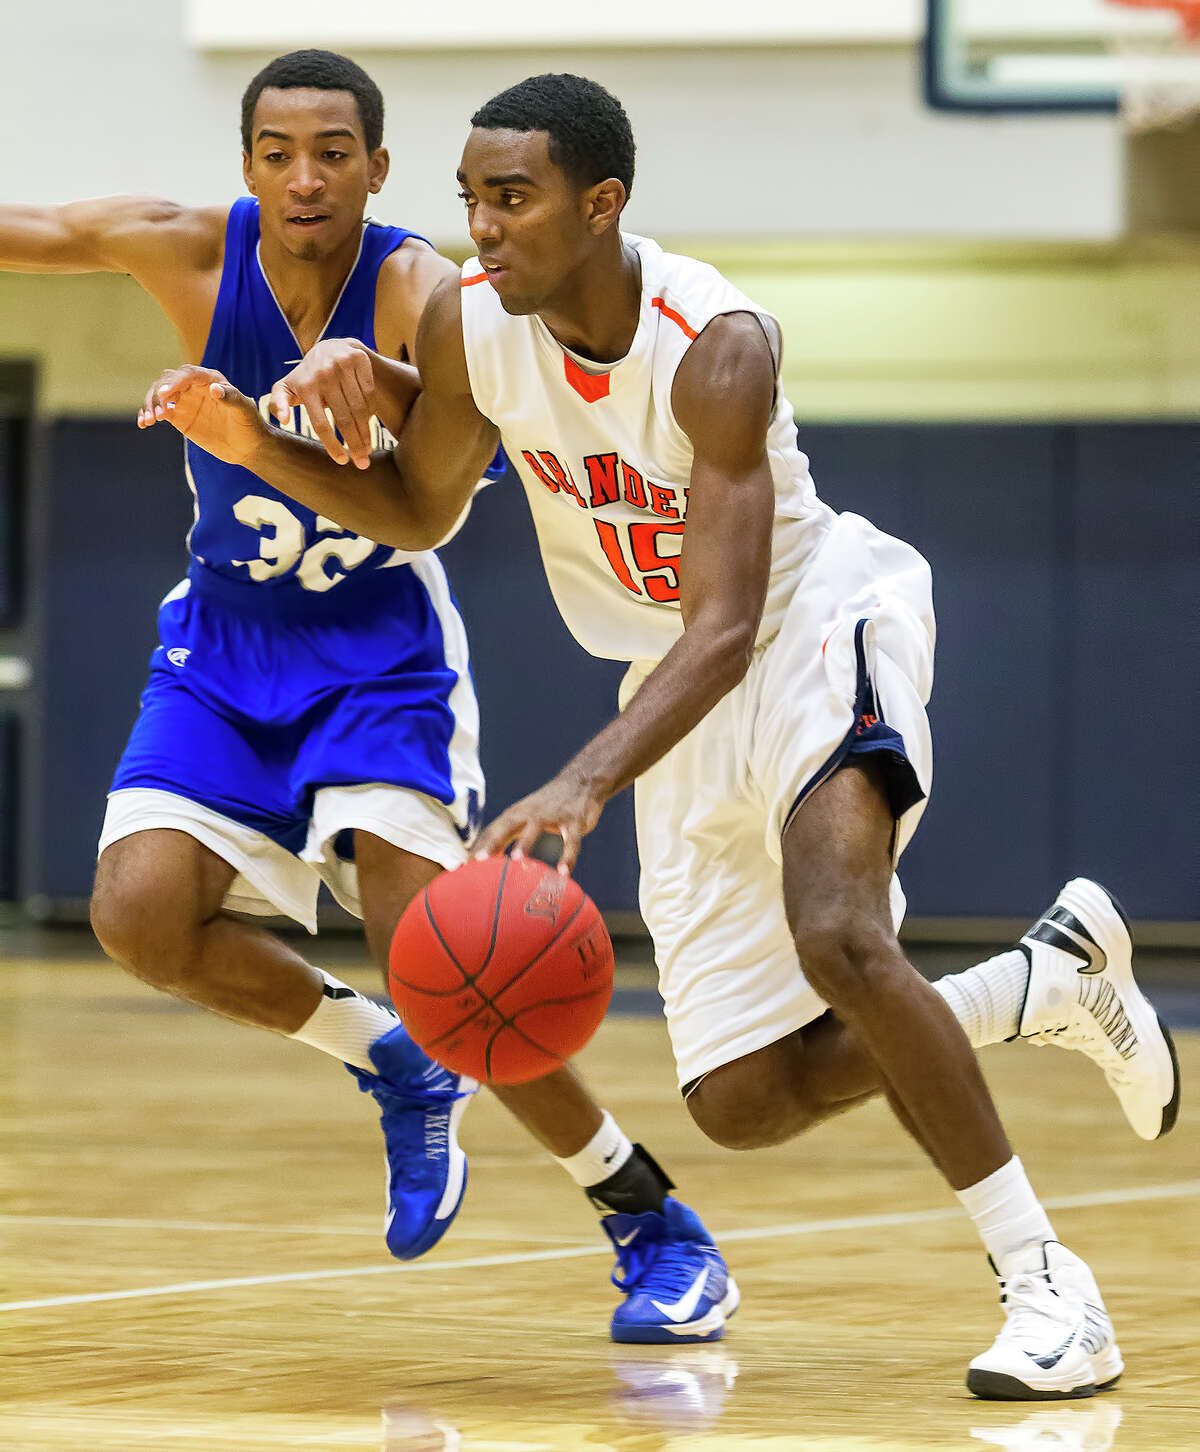 Brandeis' Justin Graham (right) drives to the basket during against MacArthur at Paul Taylor Field House on Nov. 21, 2012. Photo by Marvin Pfeiffer / Prime Time Newspapers